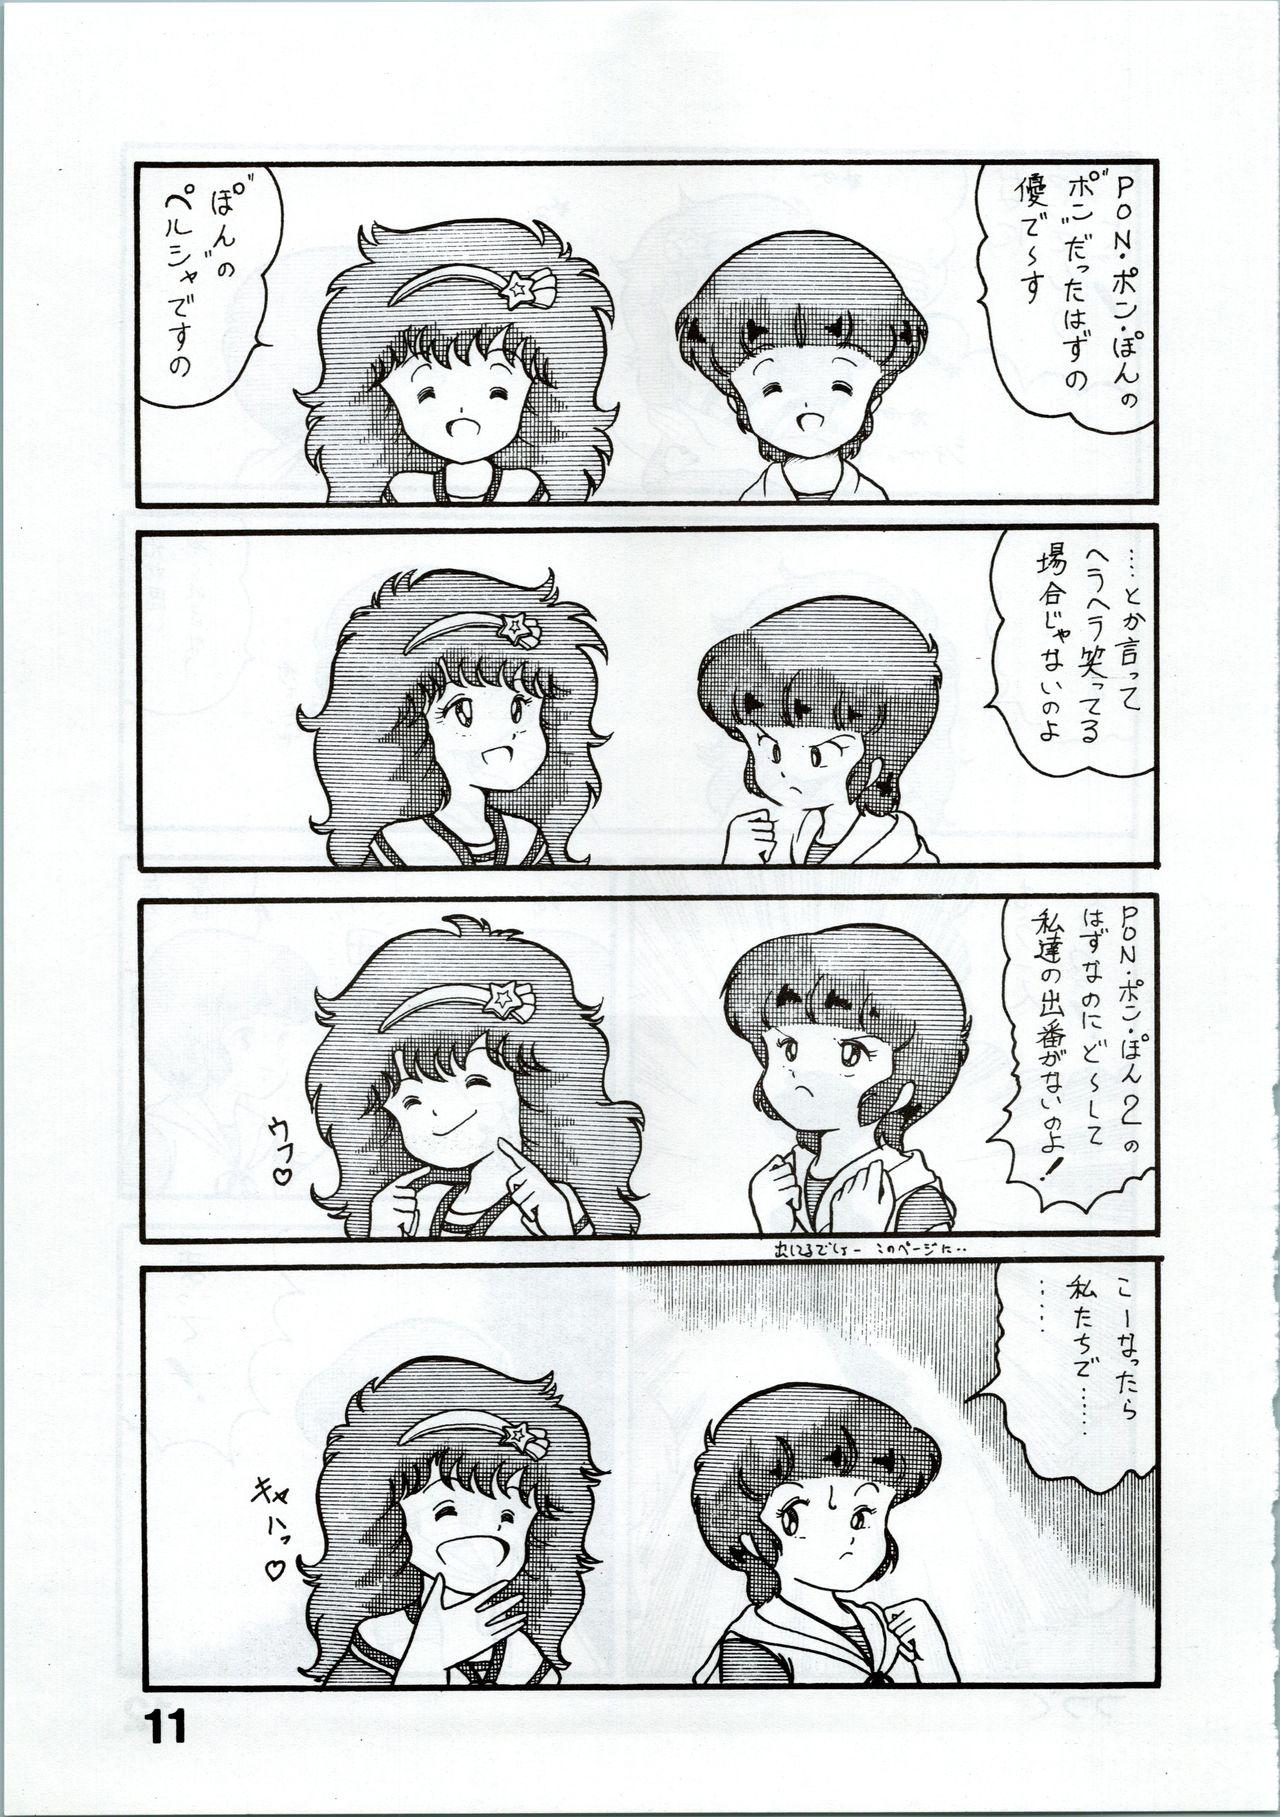 Gaygroup Magical Ponponpon 2 - Magical emi Tiny Tits - Page 11